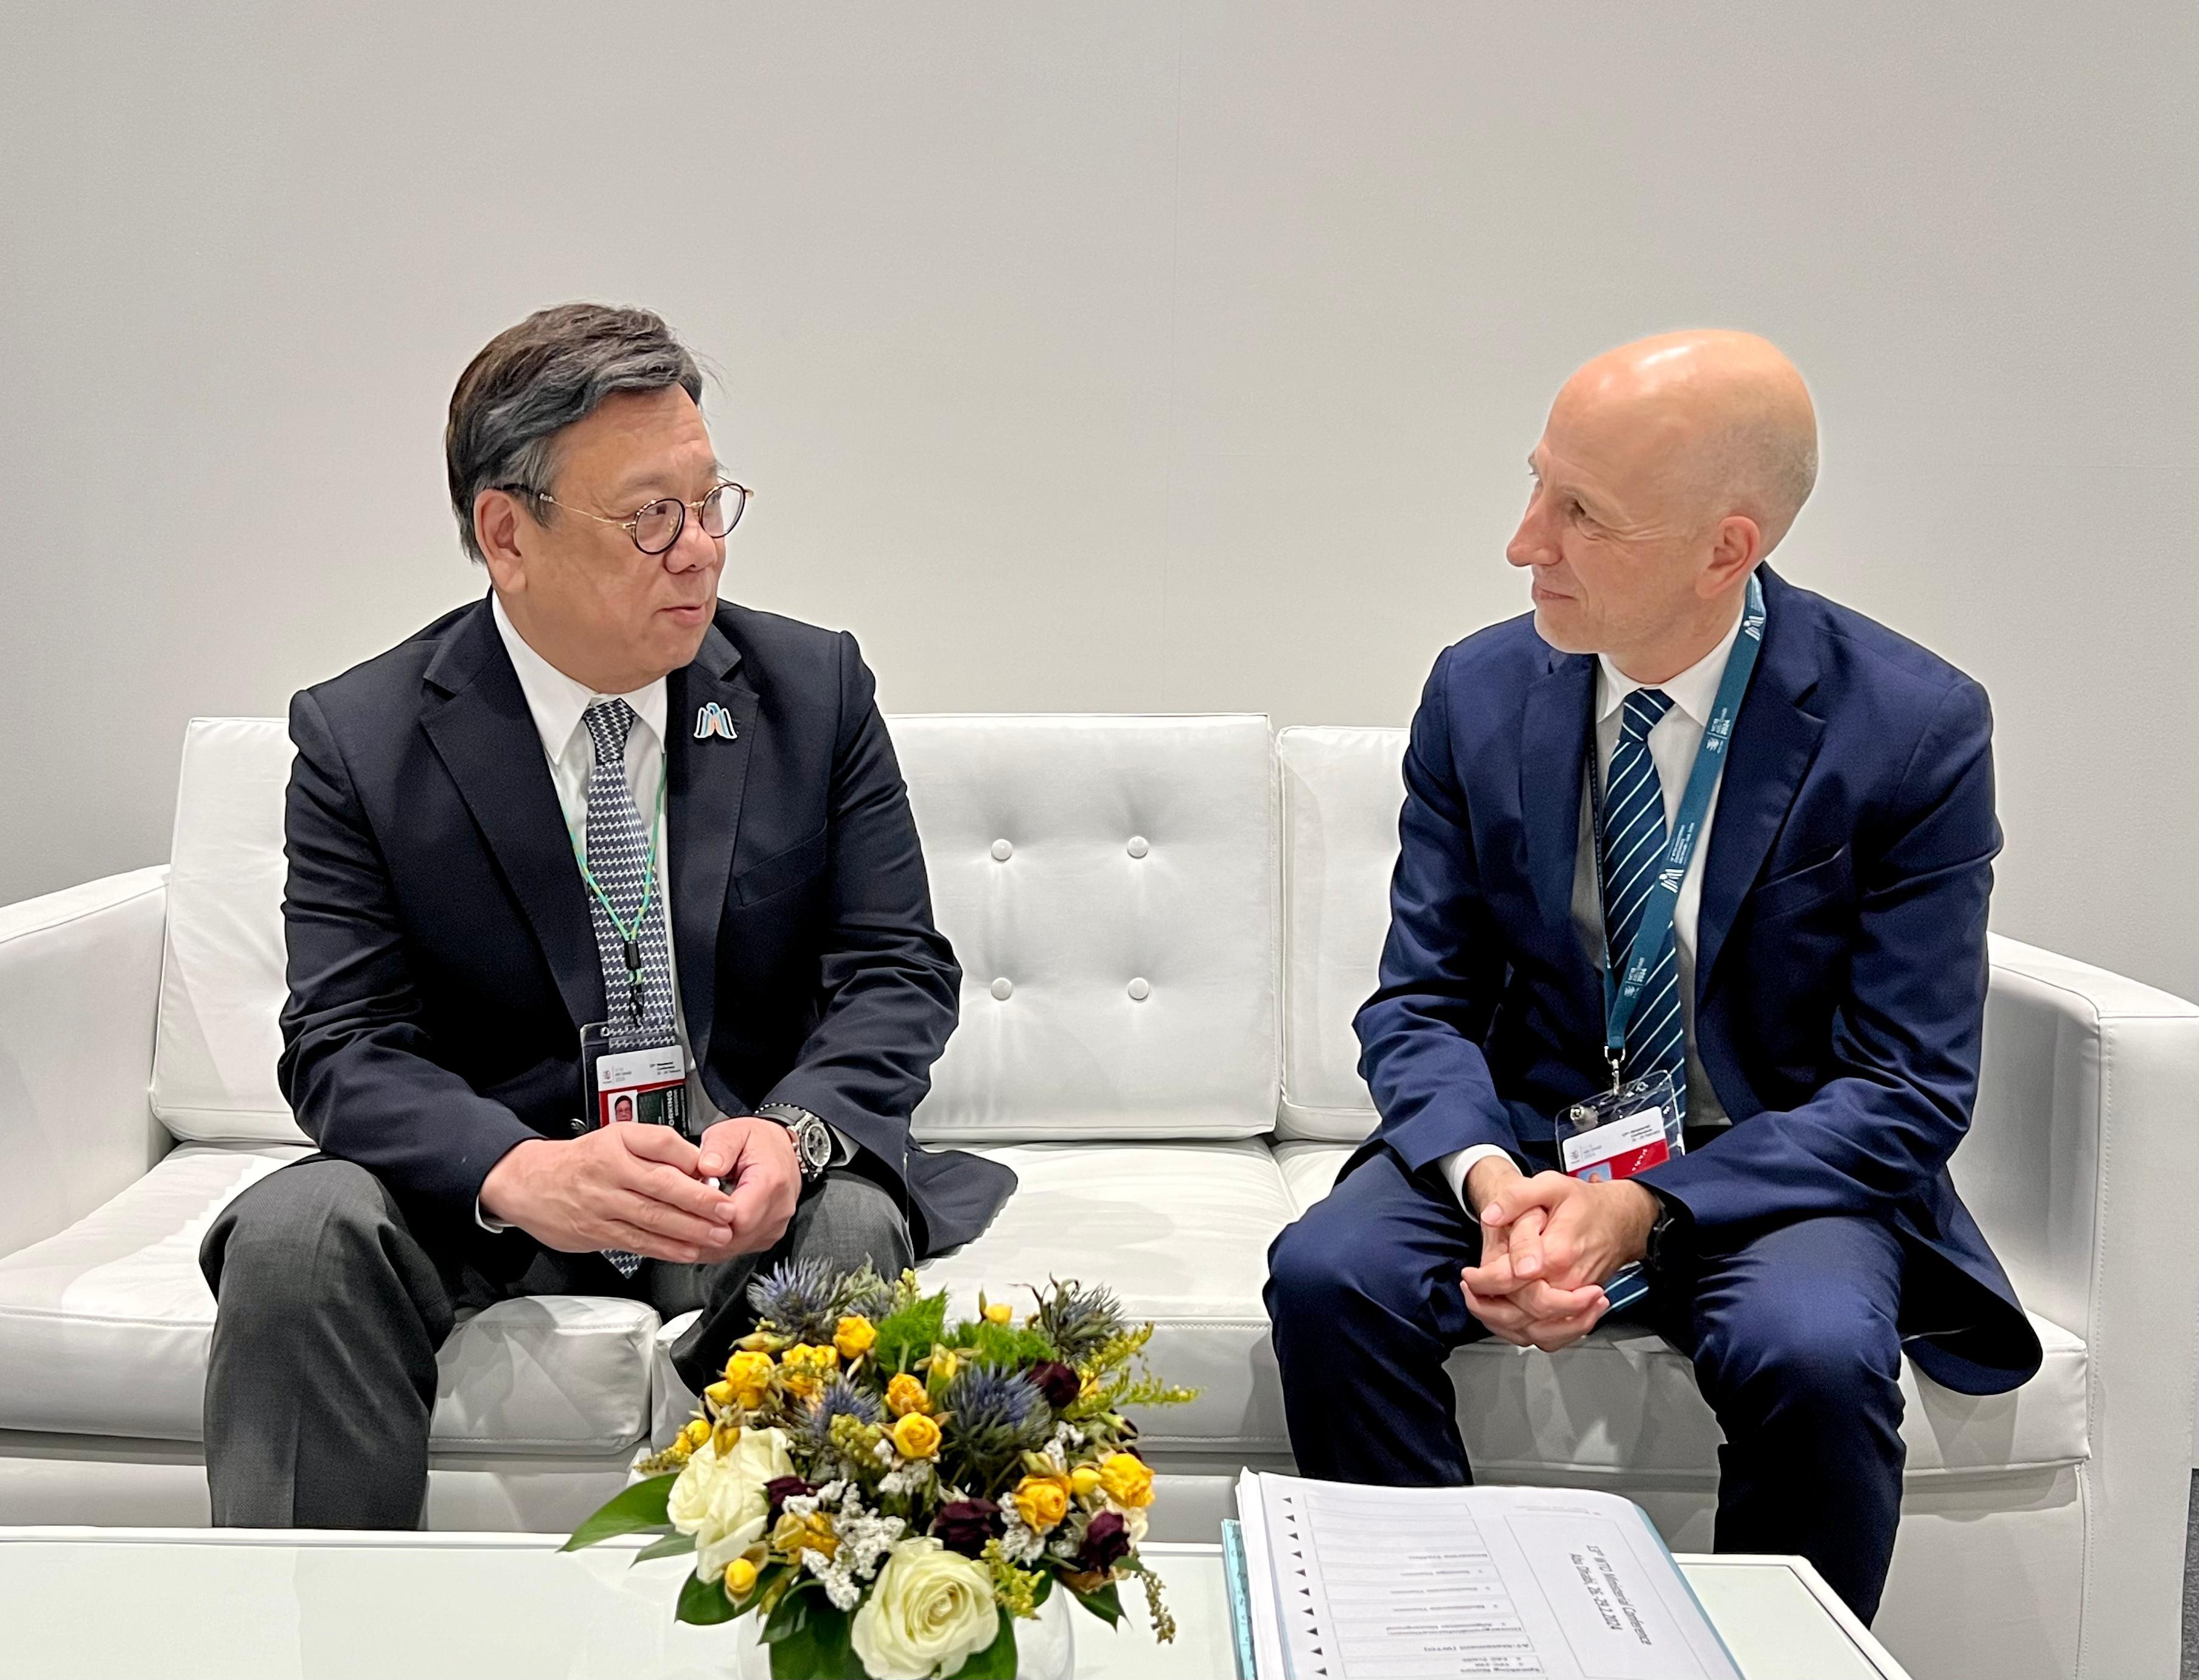 The Secretary for Commerce and Economic Development, Mr Algernon Yau (left), met with the Federal Minister of Labour and Economy of Austria, Dr Martin Kocher (right), on the sidelines of the 13th World Trade Organization Ministerial Conference in Abu Dhabi, the United Arab Emirates, on February 29 (Abu Dhabi time) to exchange views on issues of mutual interests.